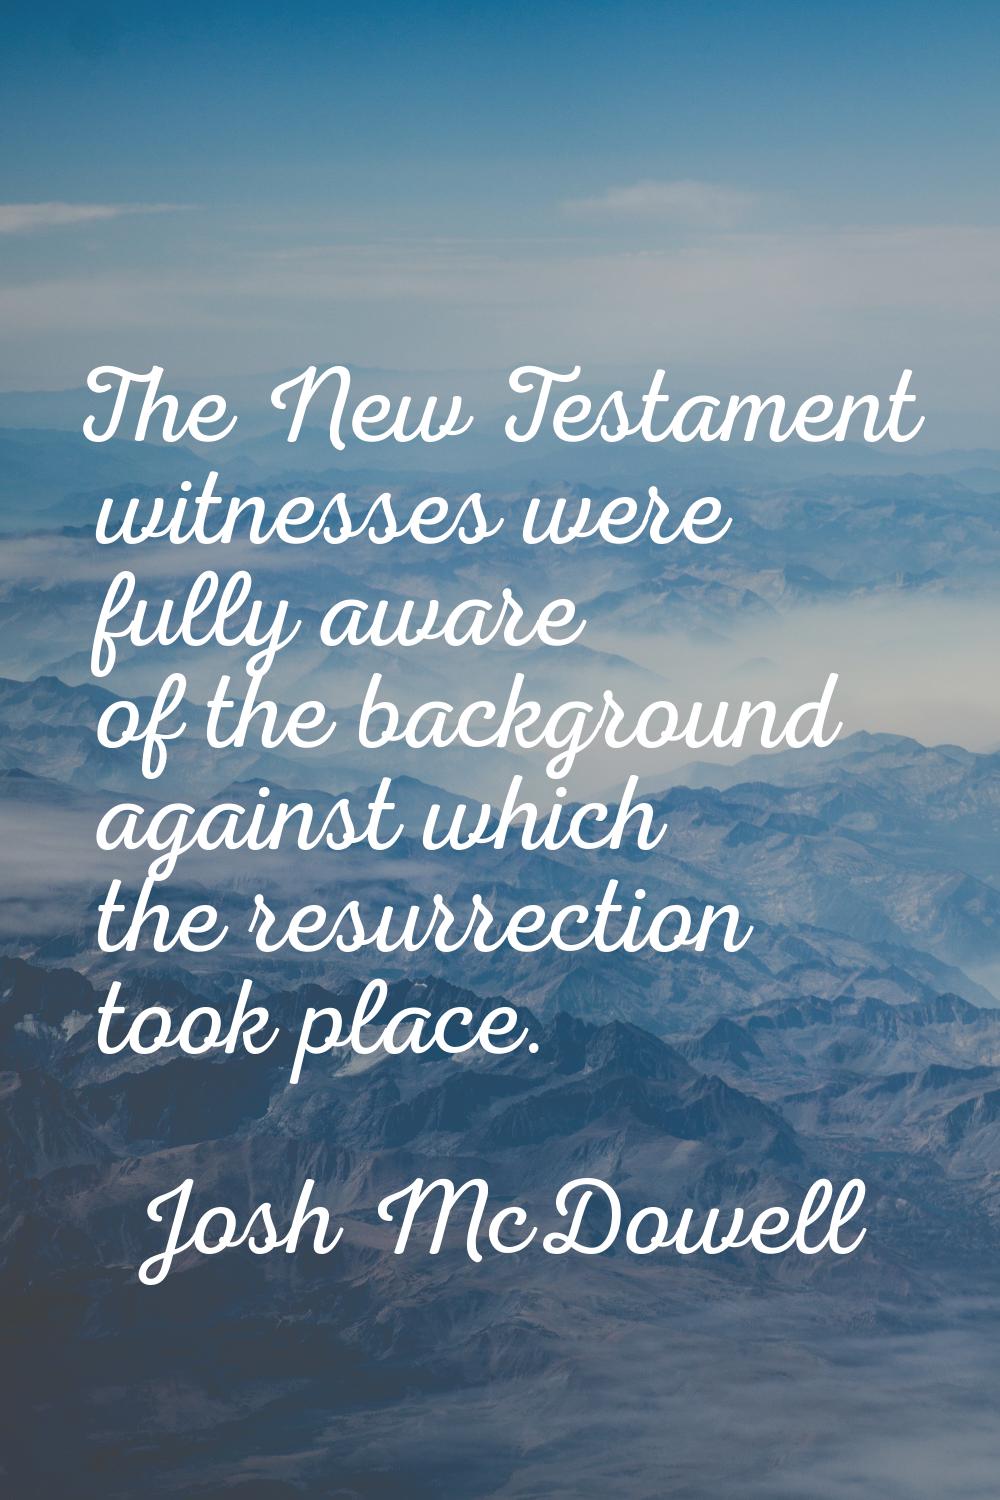 The New Testament witnesses were fully aware of the background against which the resurrection took 